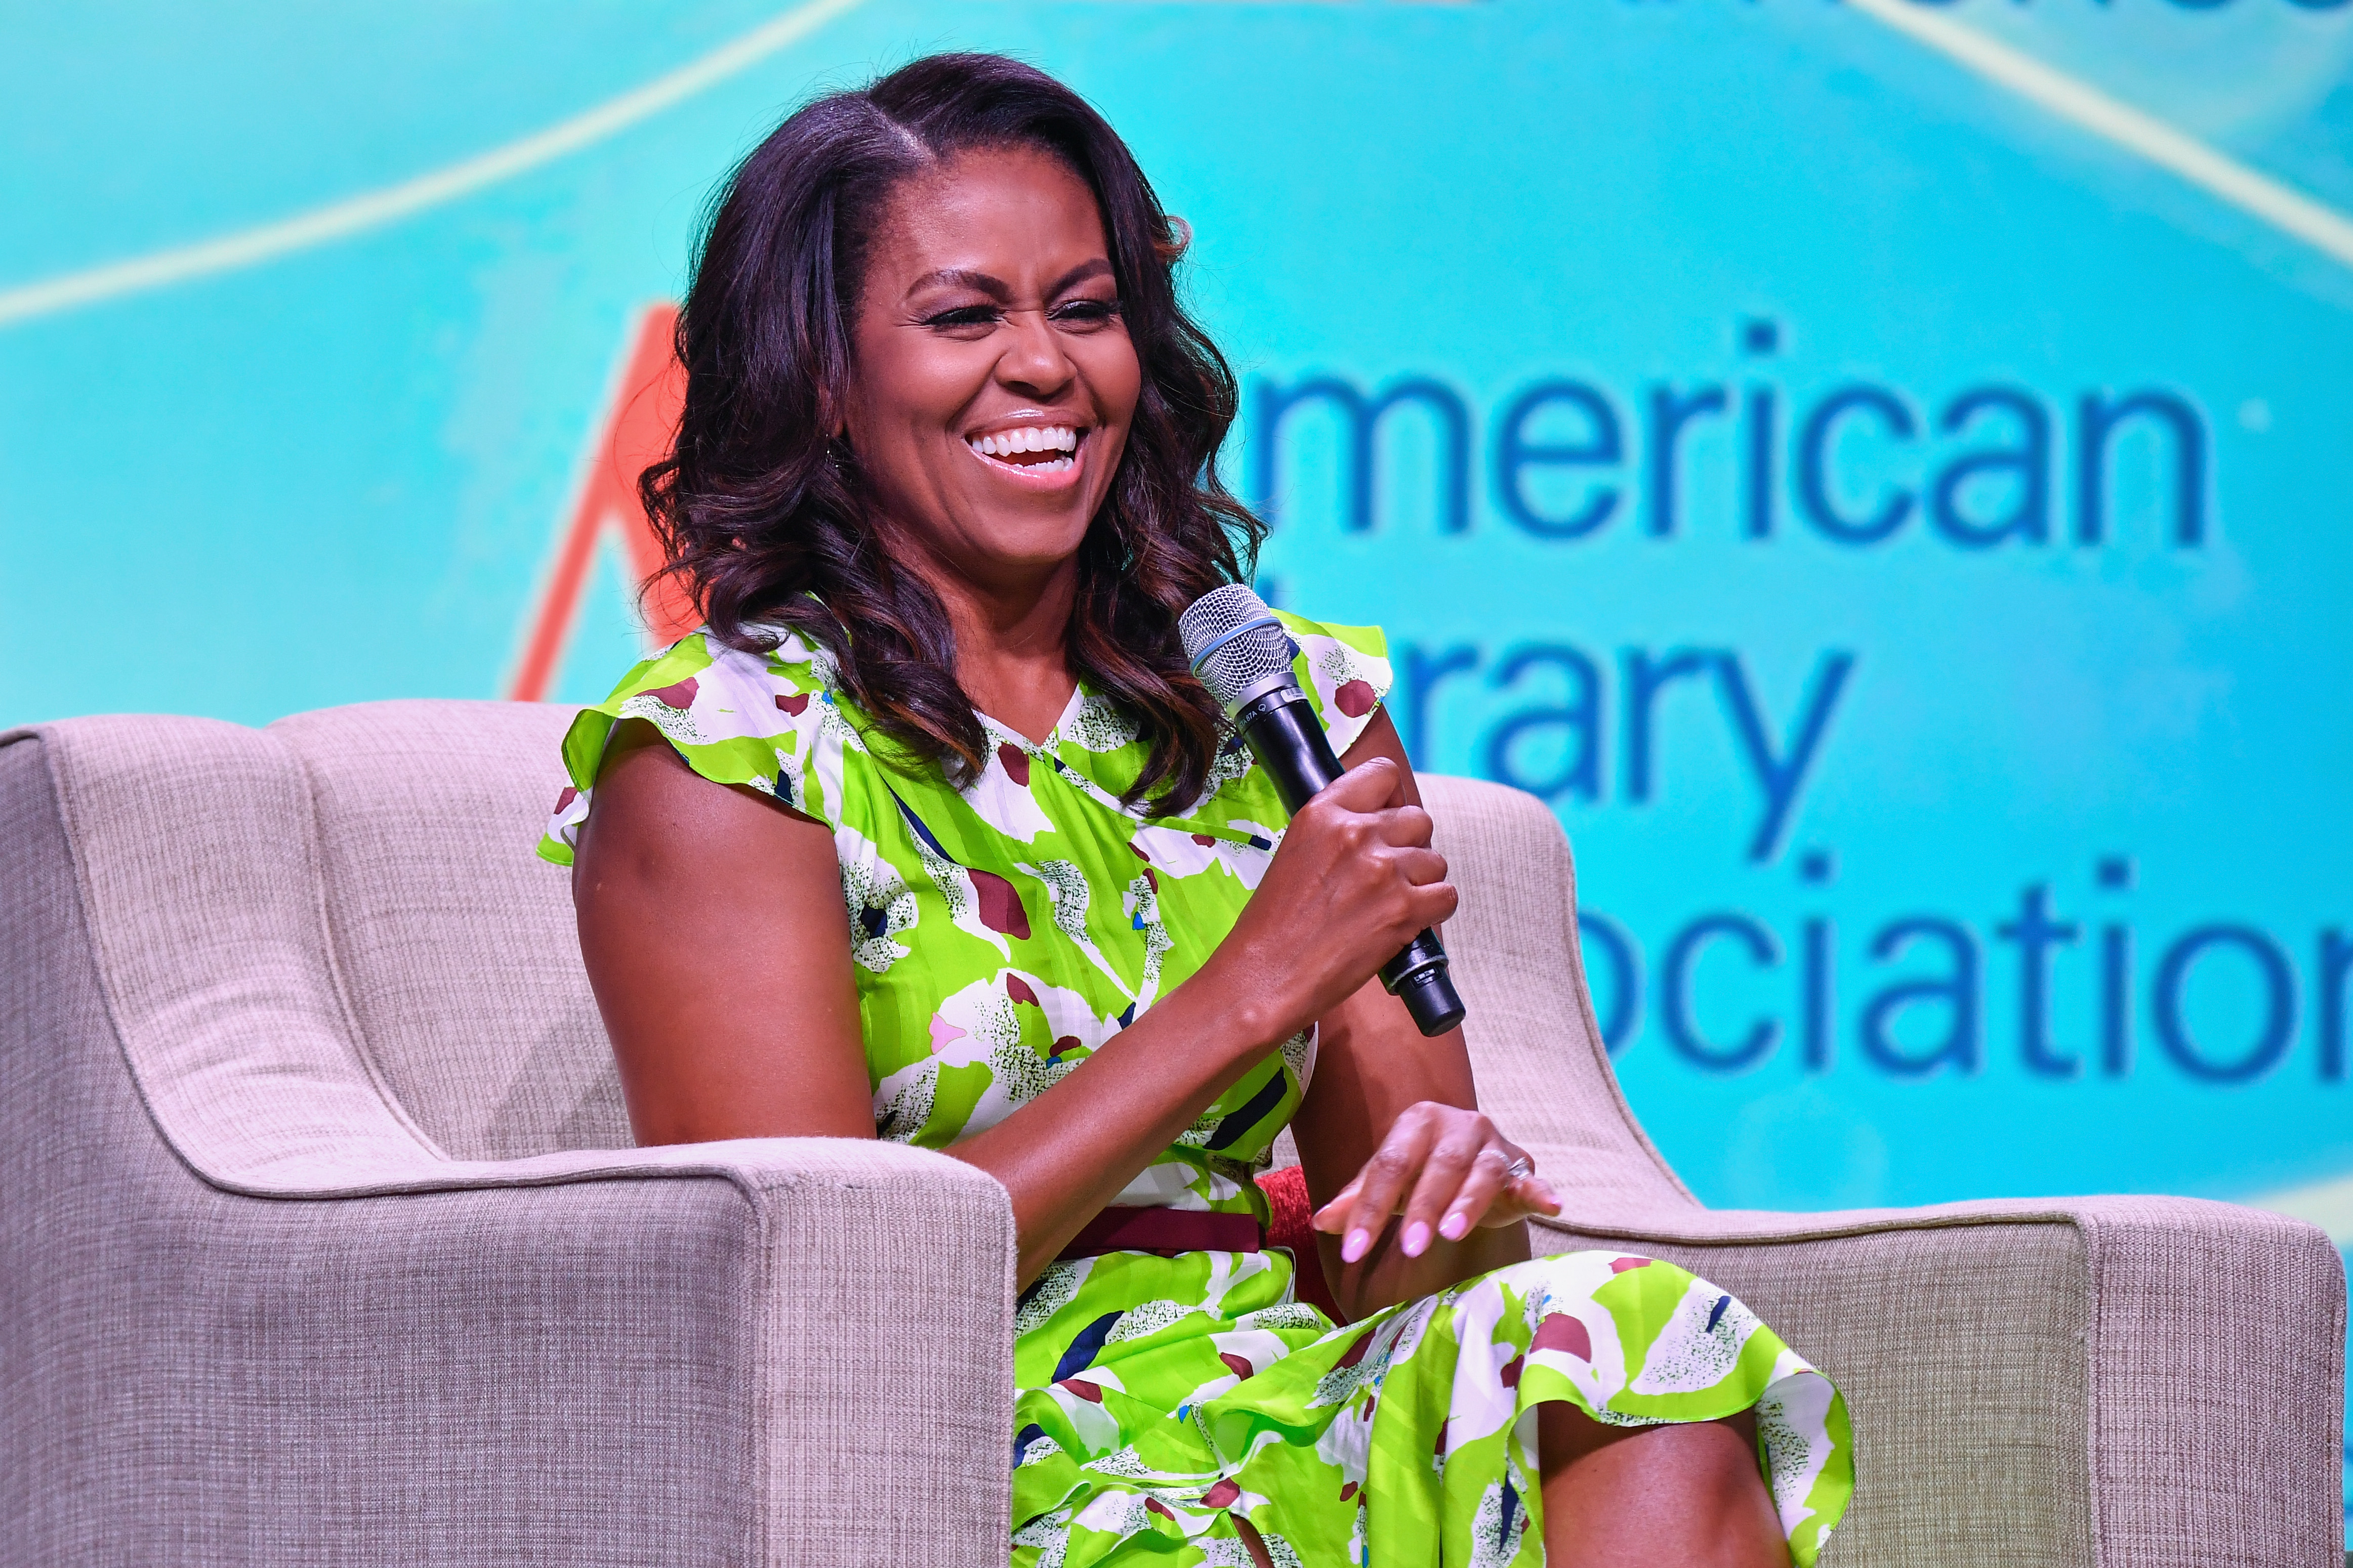 ormer First Lady of the United States Michelle Obama speaks during the Opening General Session of the 2018 American Library Association Annual Conference at Ernest N. Morial Convention Center in New Orleans, Louisiana on June 22, 2018. (Erika Goldring/WireImage)